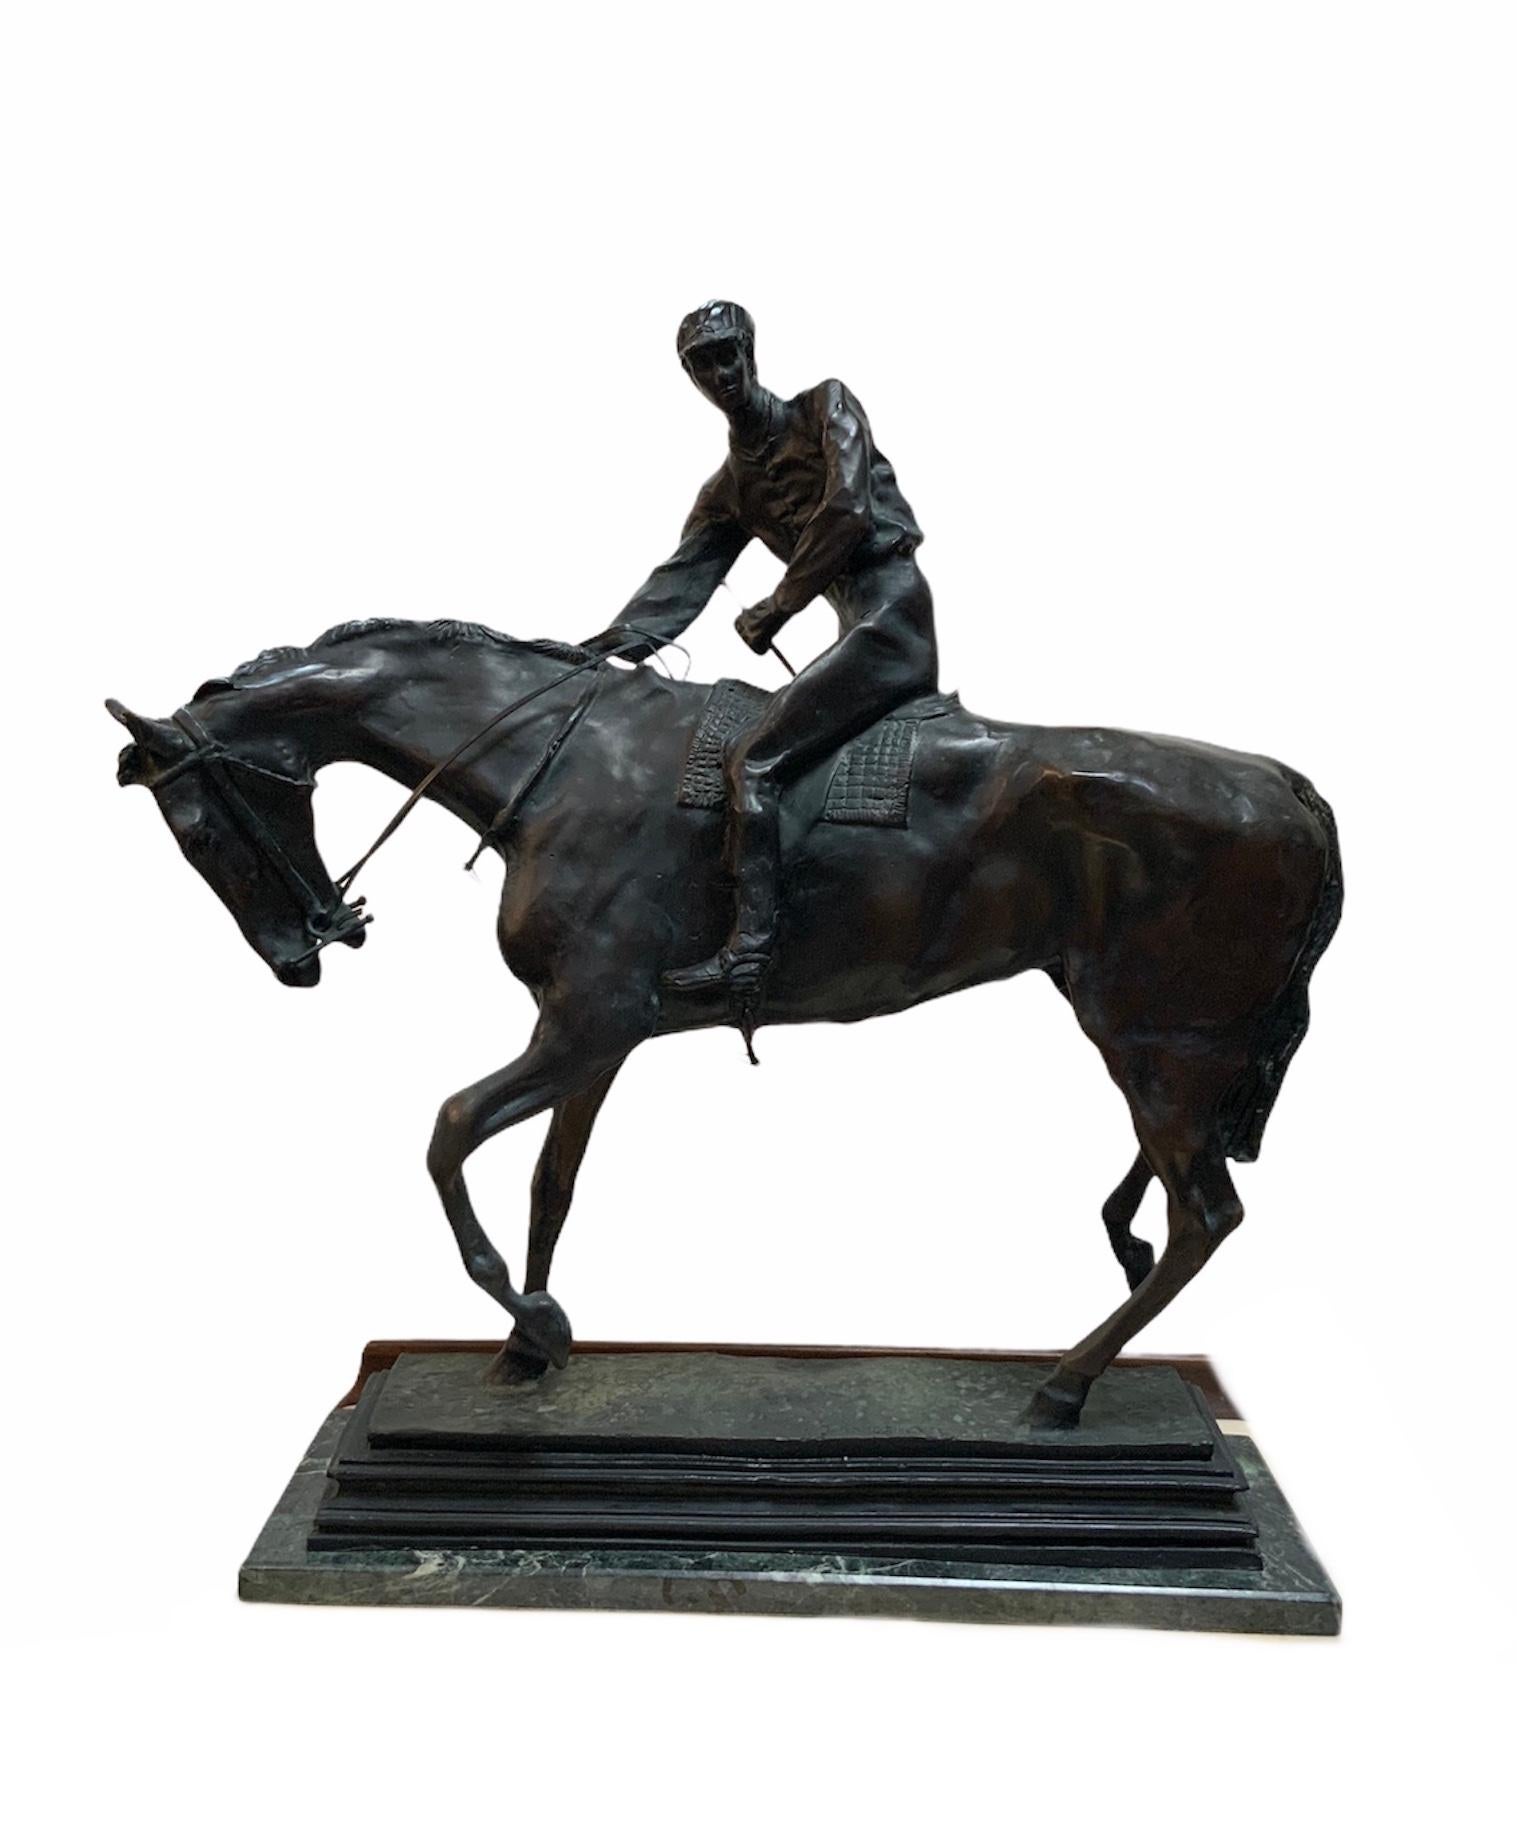 20th Century Patinated Bronze Sculpture of Le Grand Jockey by Isidore J. Bonheur